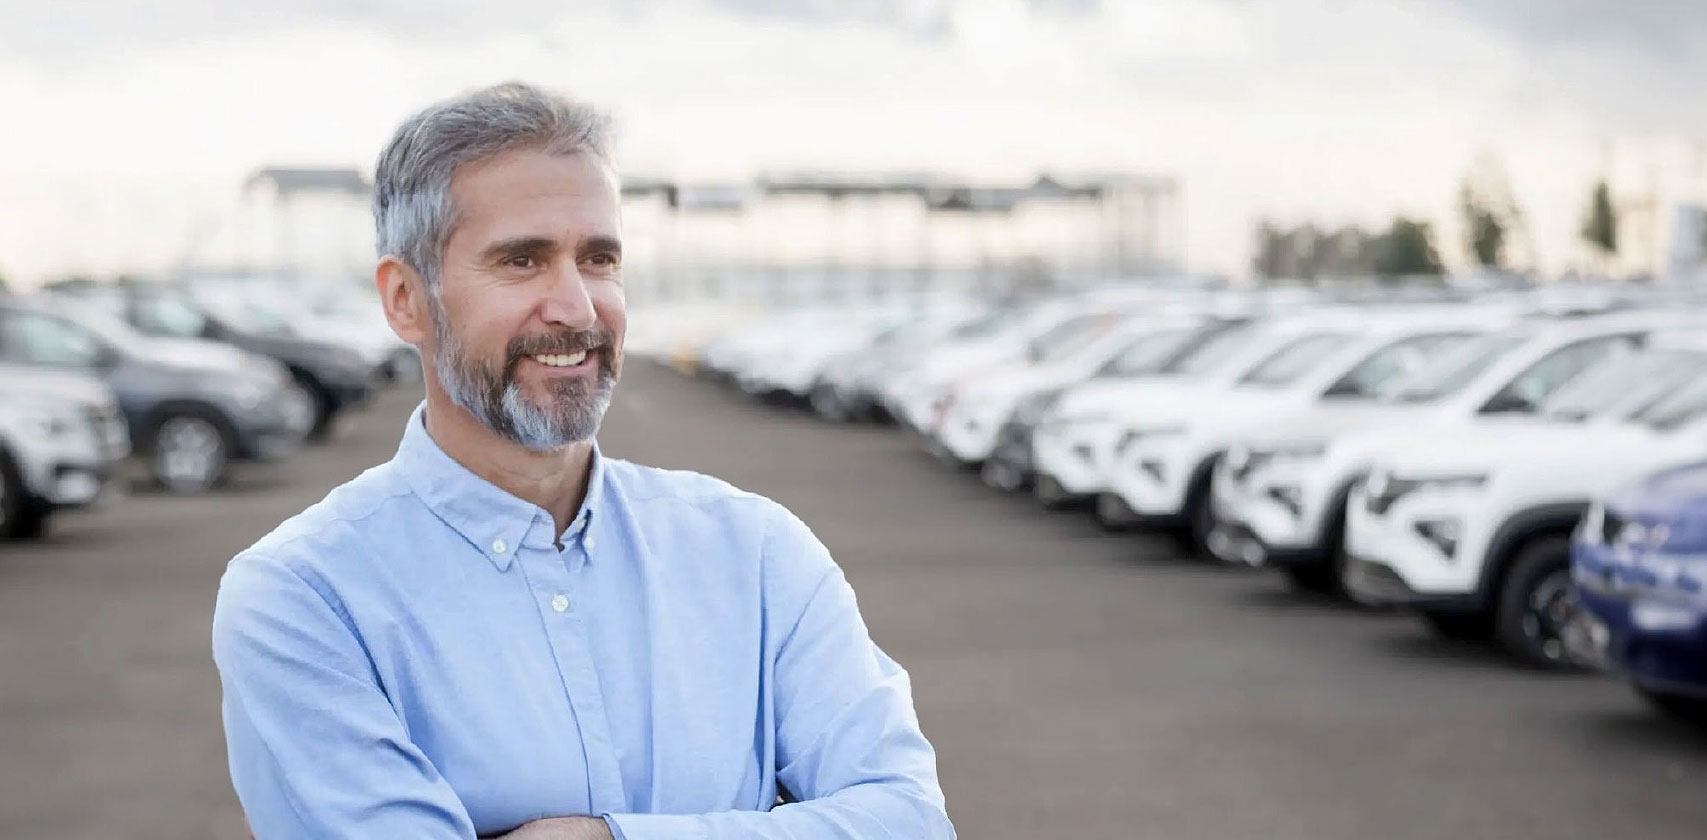 Satisfied fleetmanager with a large car fleet